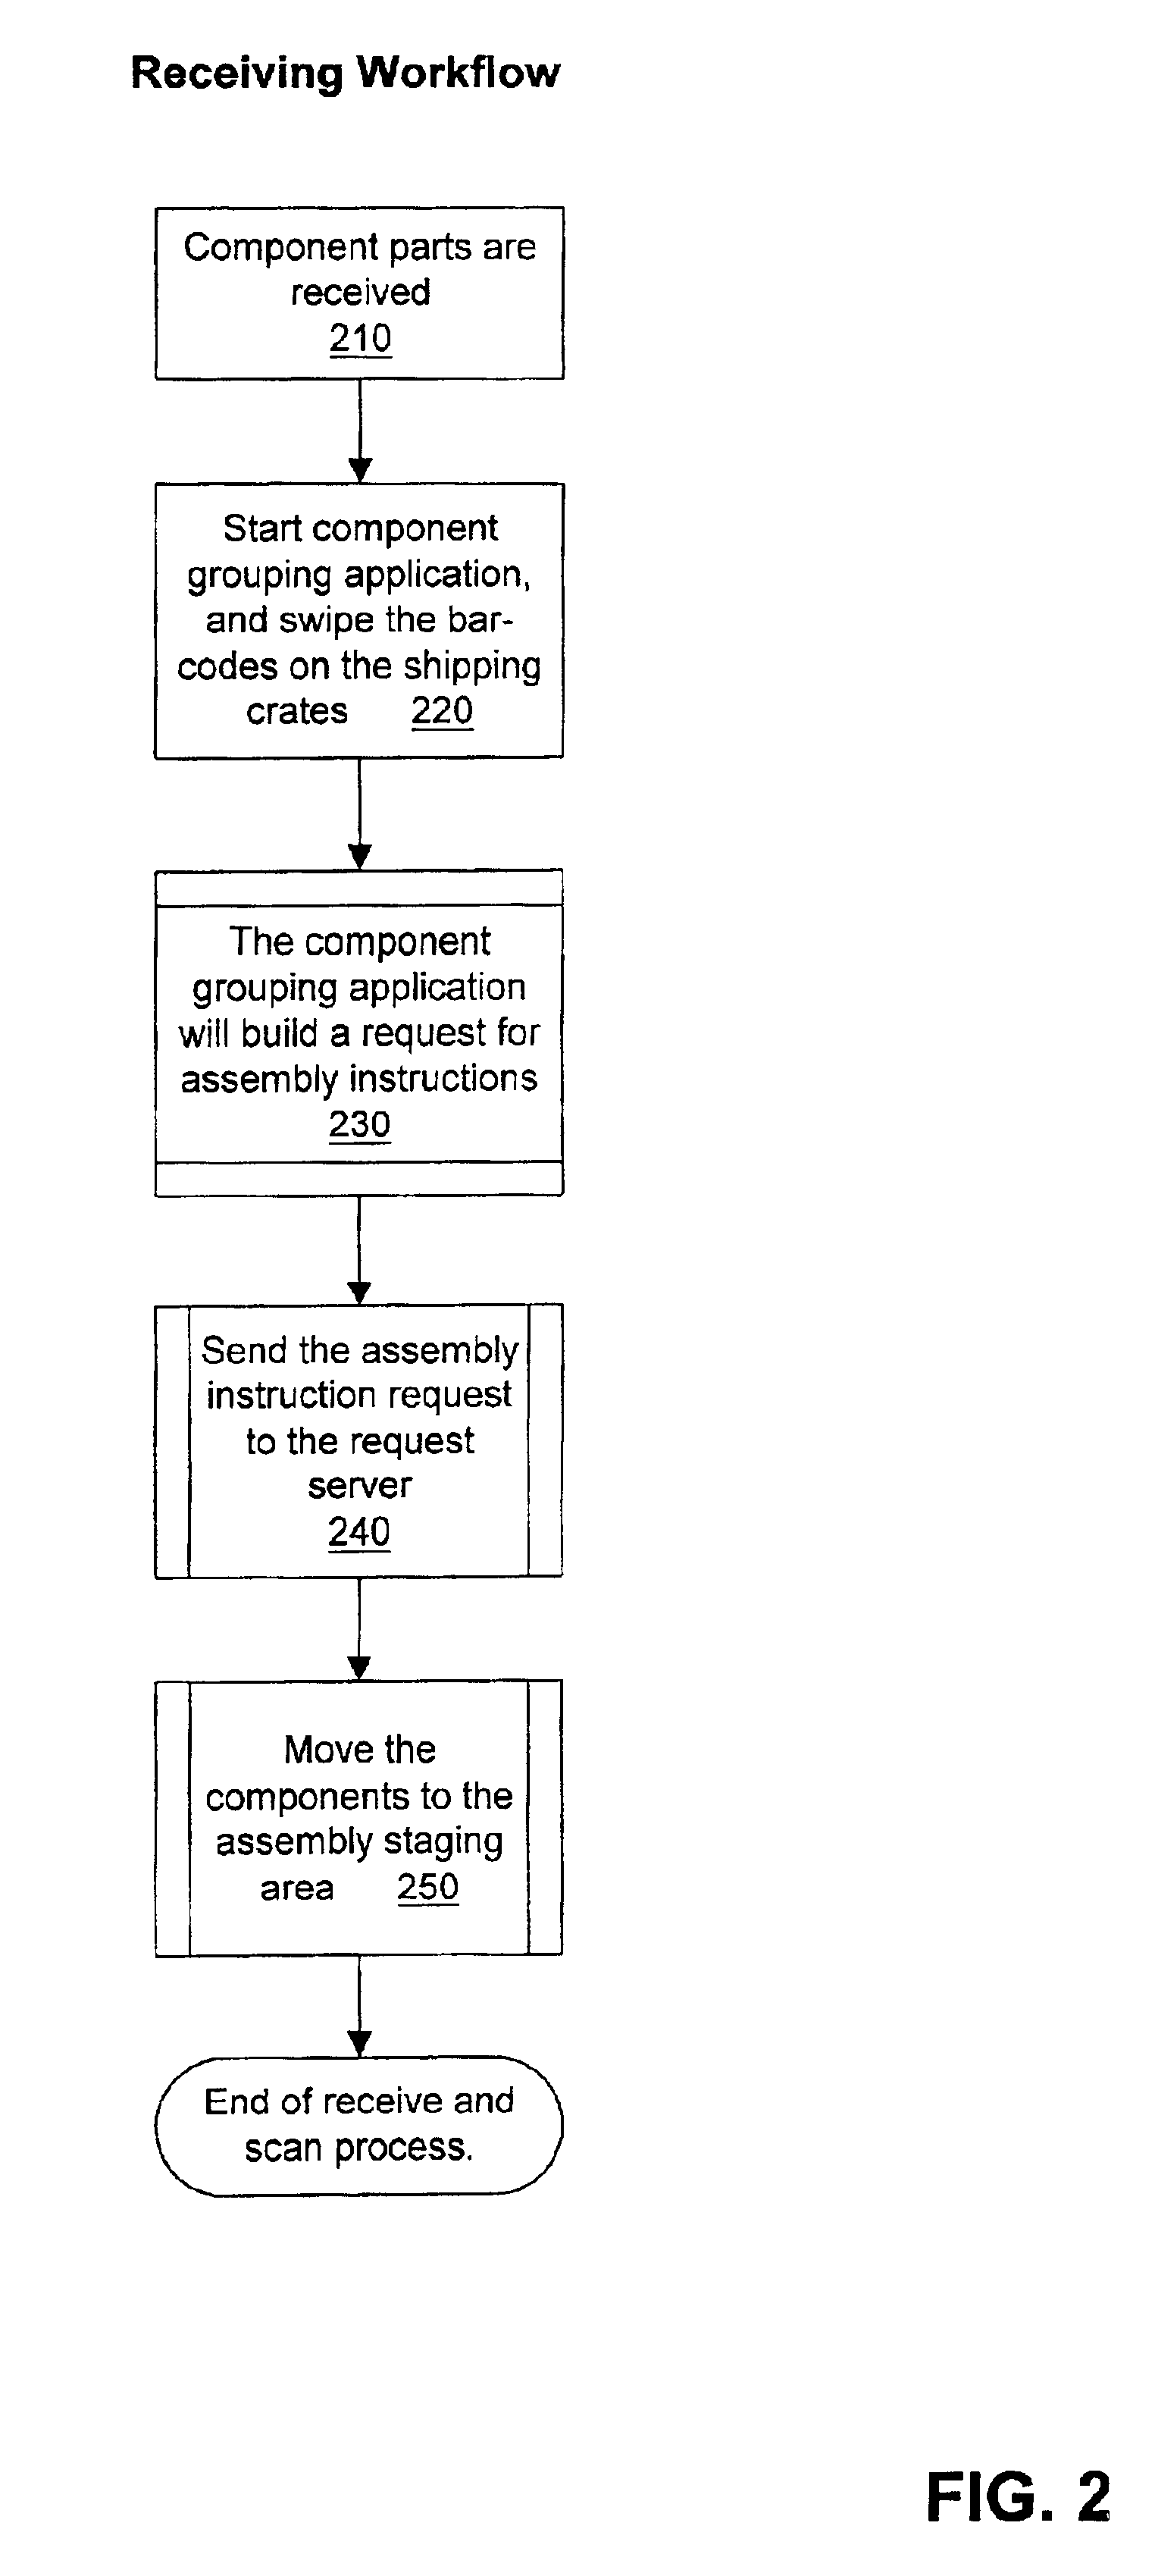 Method to use the internet for the assembly of parts